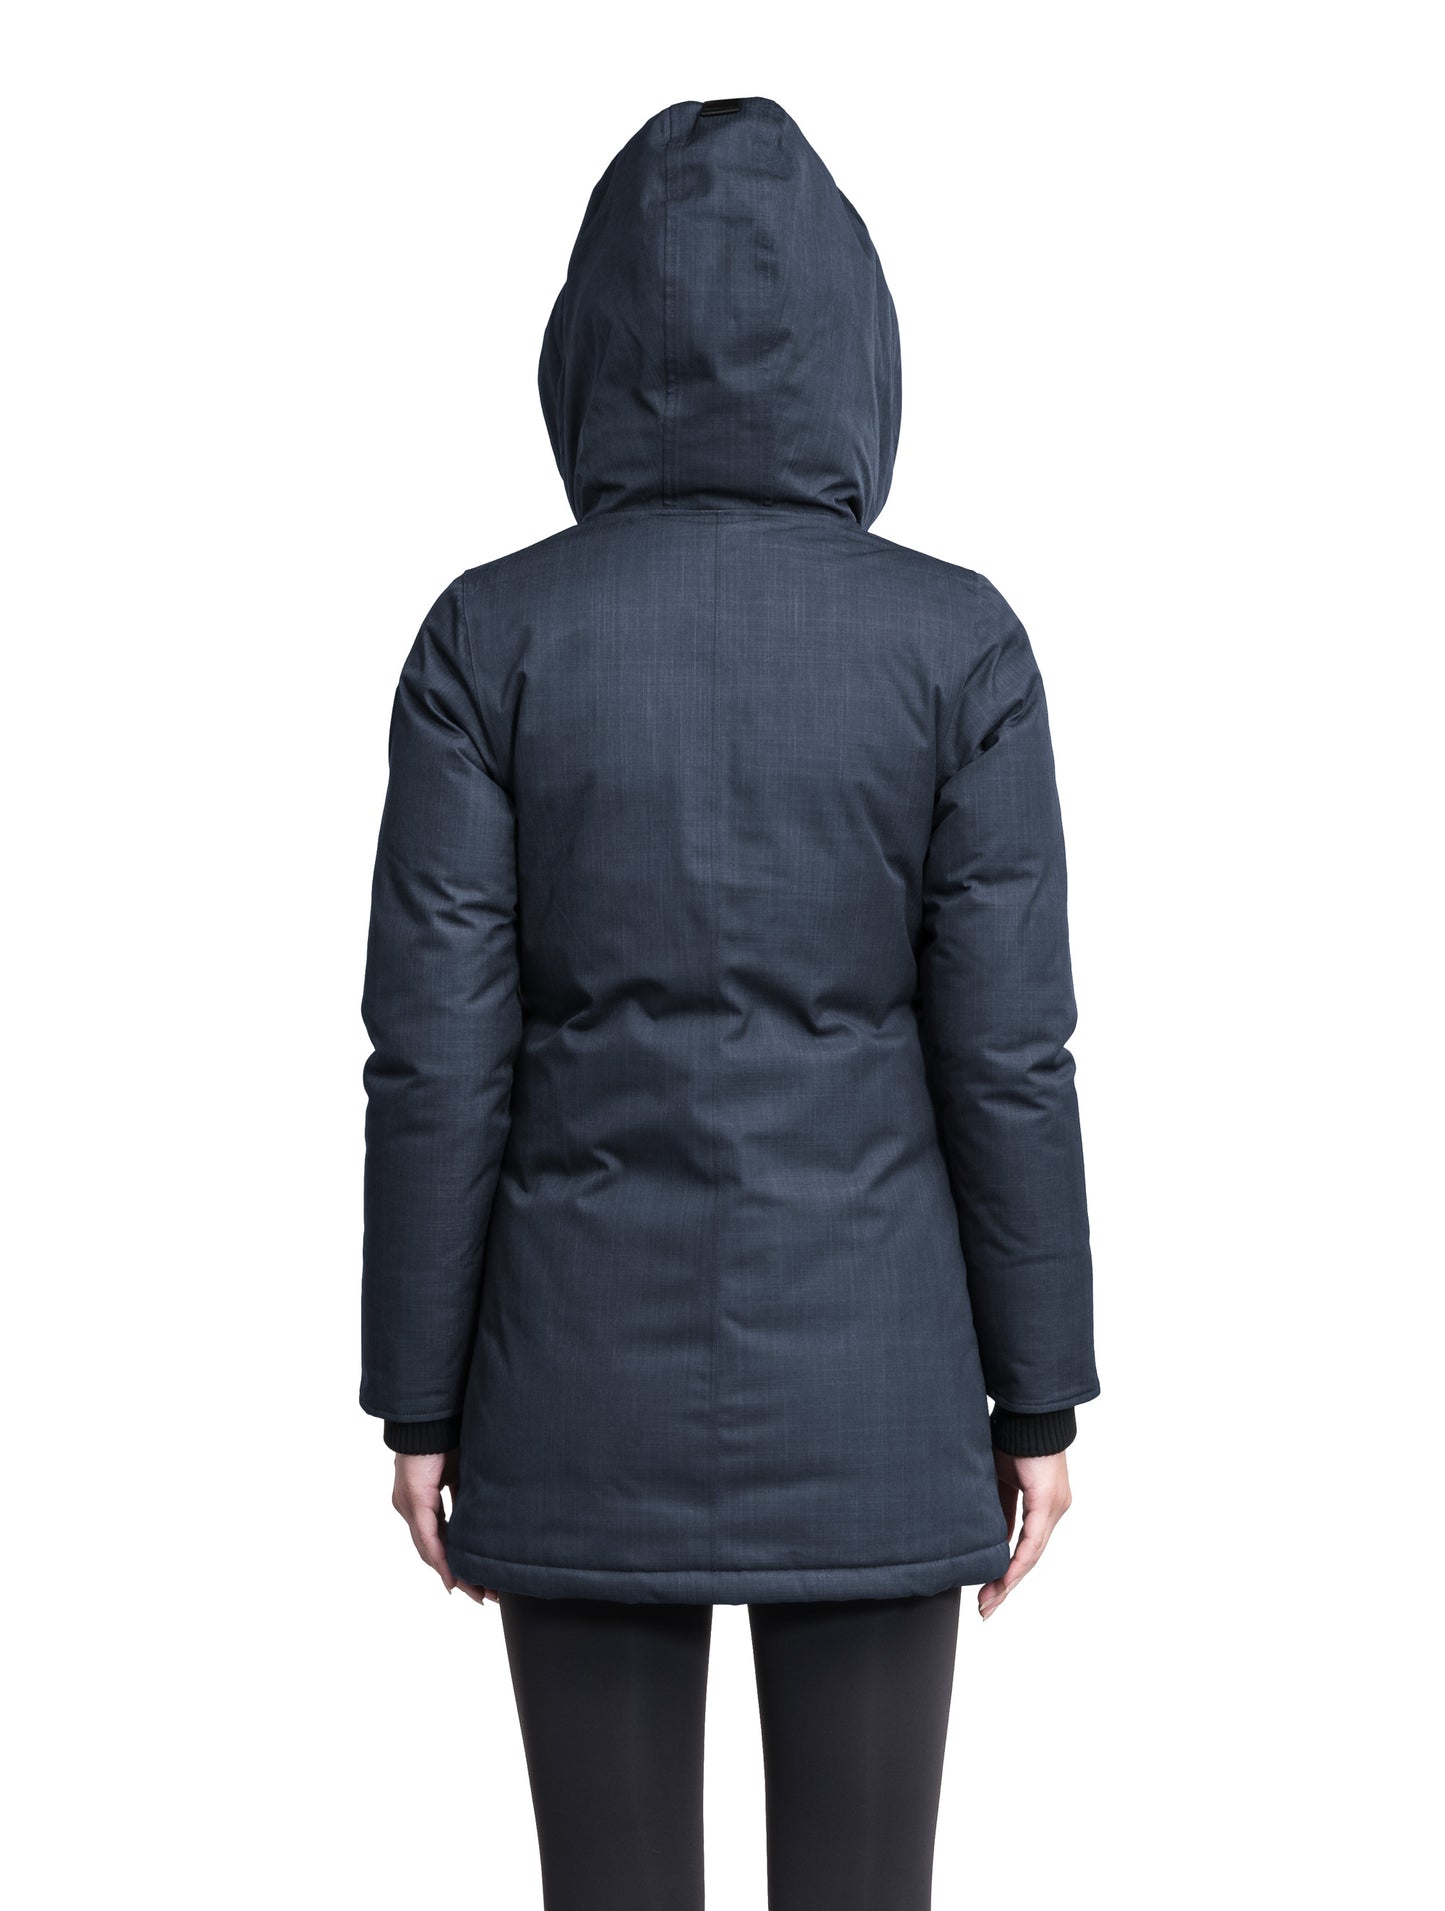 Carla Furless Ladies Parka in thigh length with Canadian Premium White Duck Down insulation, non-removable hood, centre-front zipper with magnetic closure wind flap, and four exterior pockets, in Navy